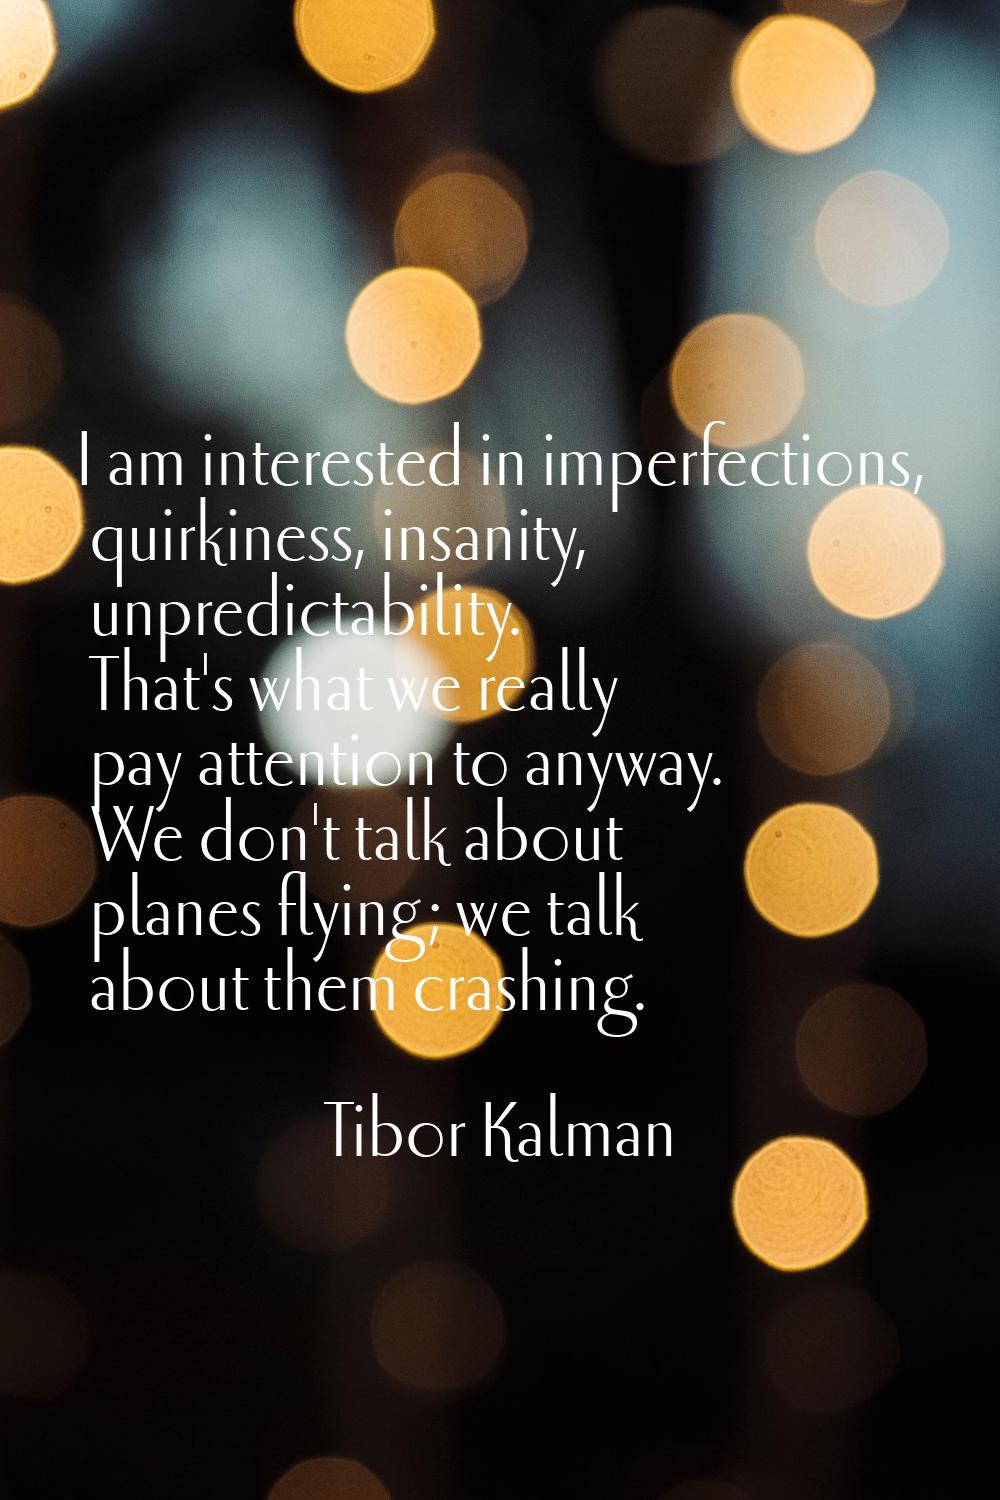 I am interested in imperfections, quirkiness, insanity, unpredictability. That's what we really pay